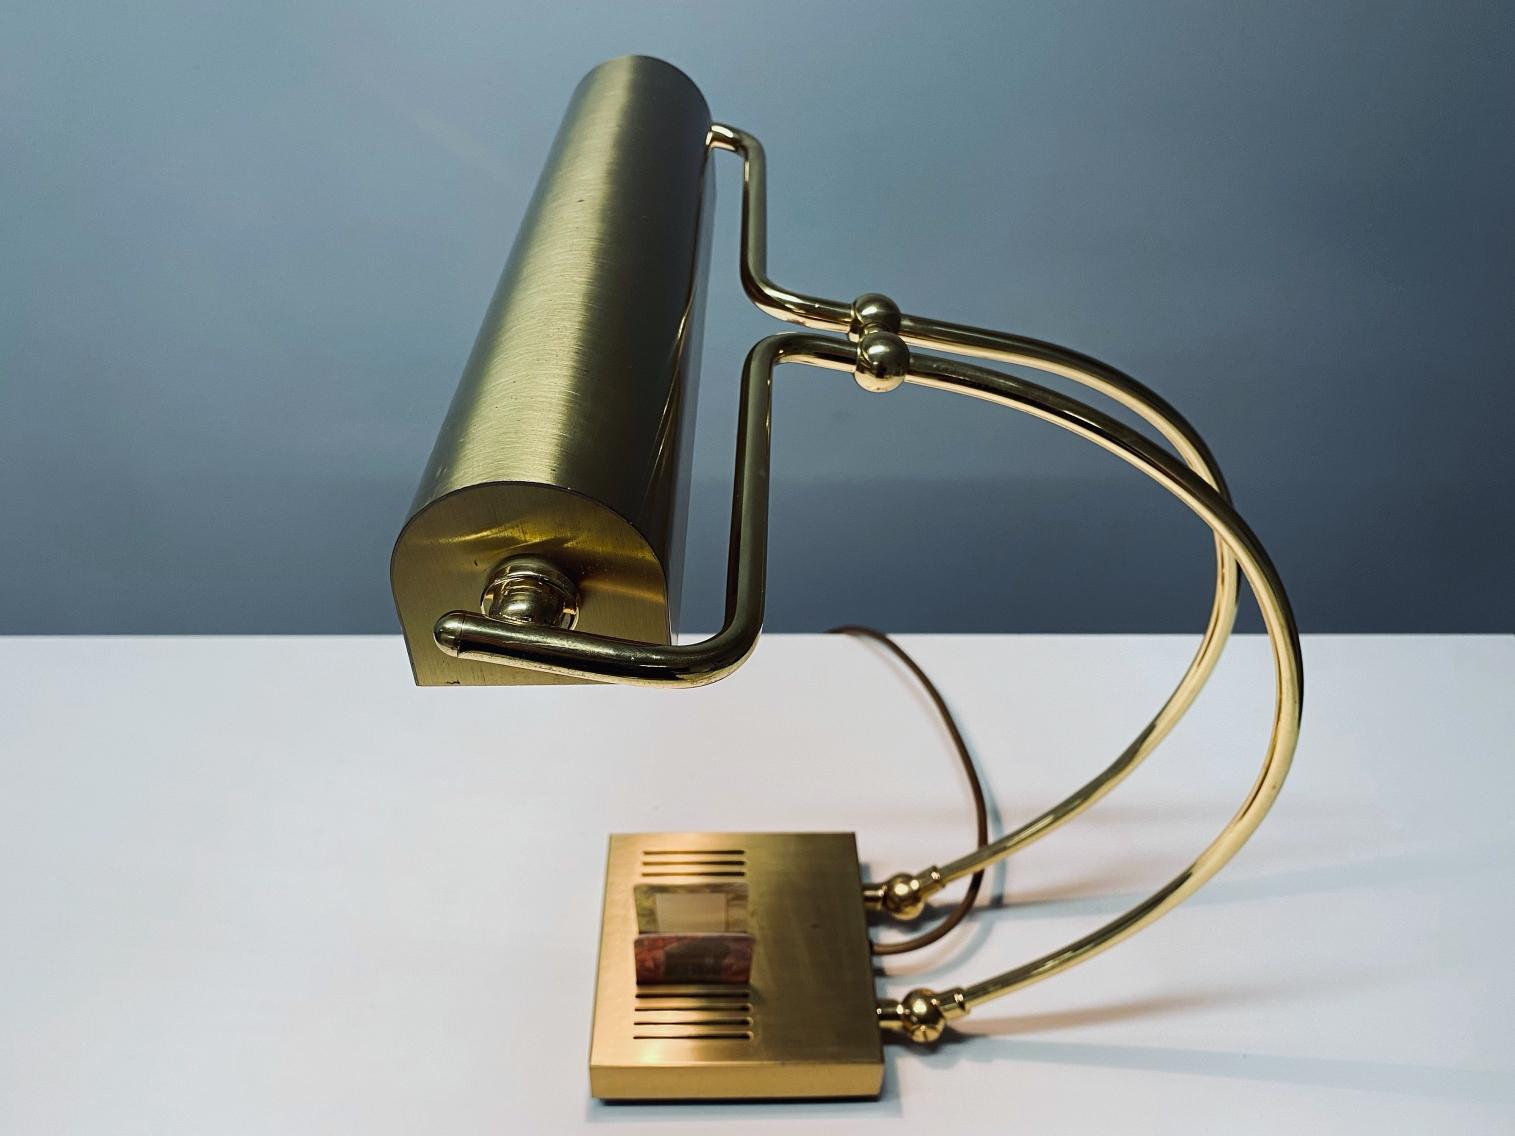 Eileen Gray Style Midcentury Brass Table Lamp, 1970s, Germany For Sale 3